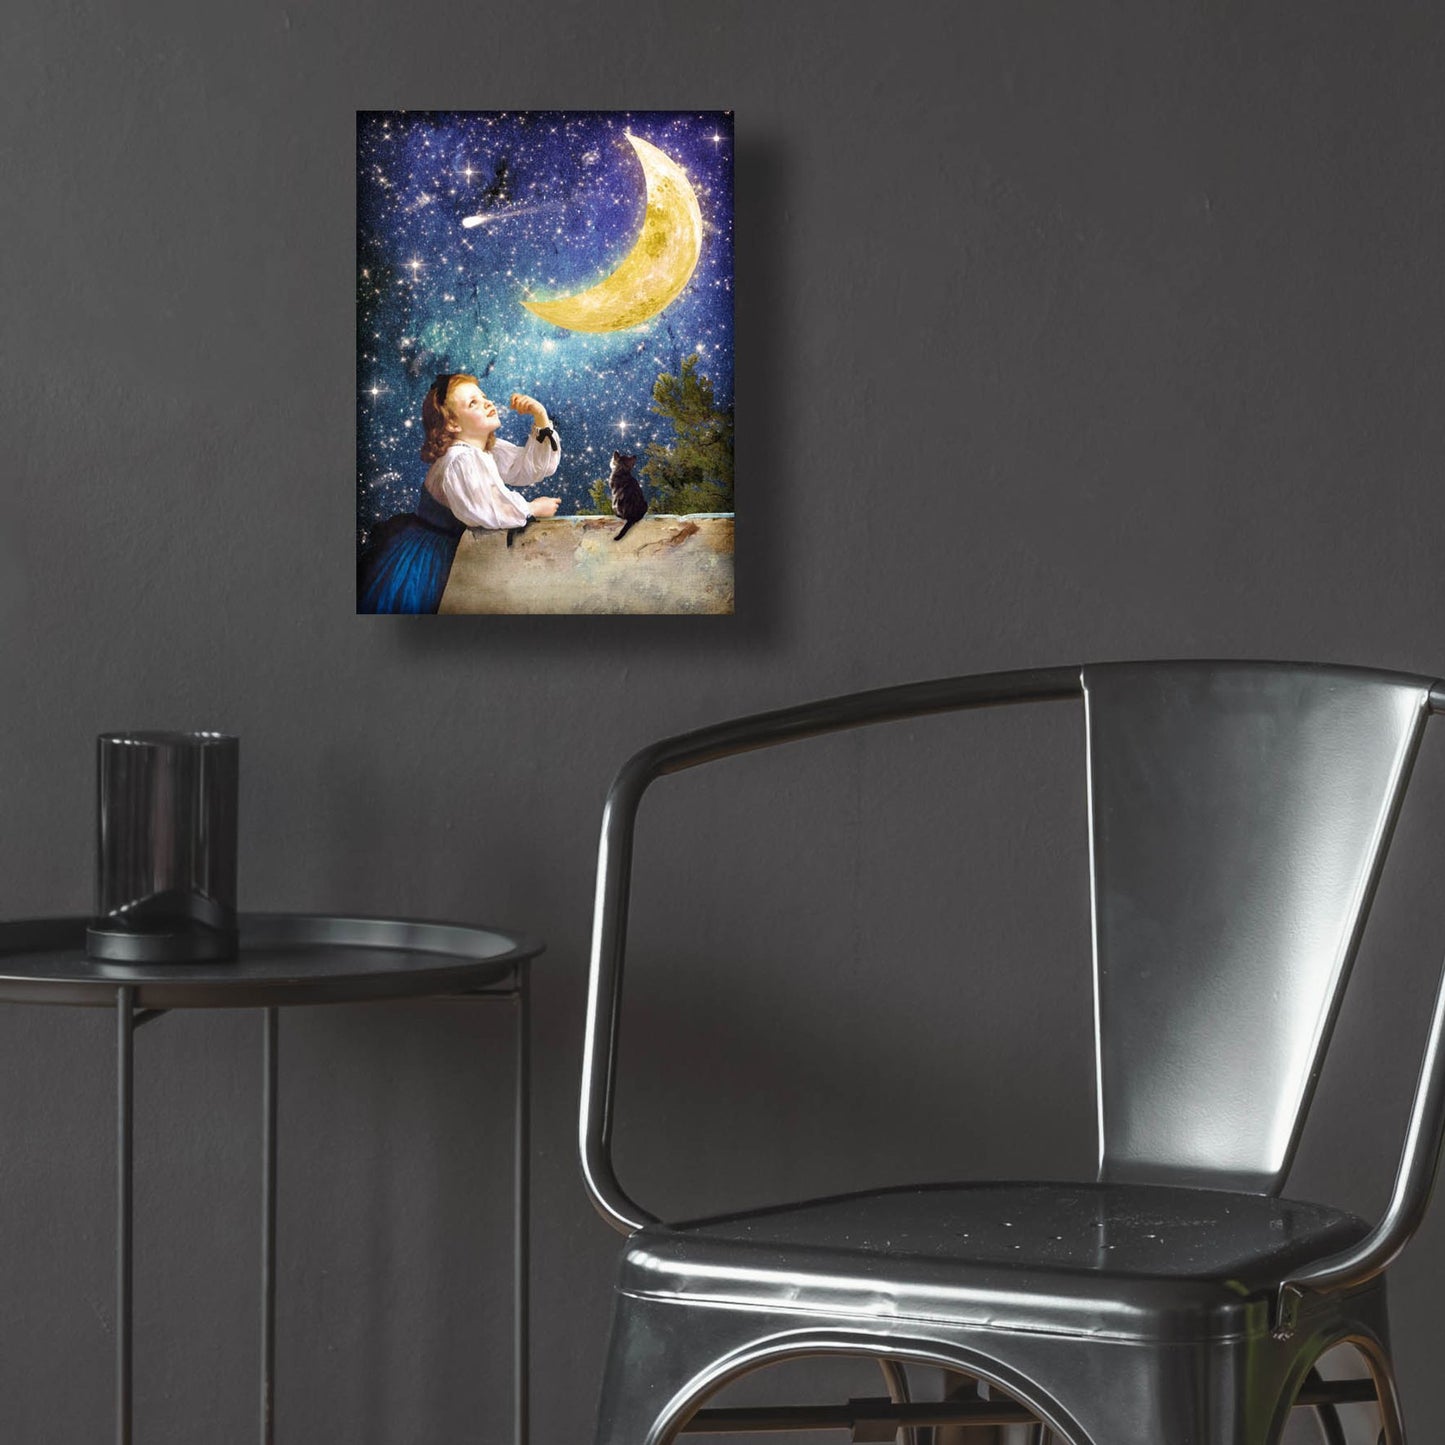 Epic Art 'One Wish Upon the Moon' by Diogo Verissimo, Acrylic Glass Wall Art,12x16